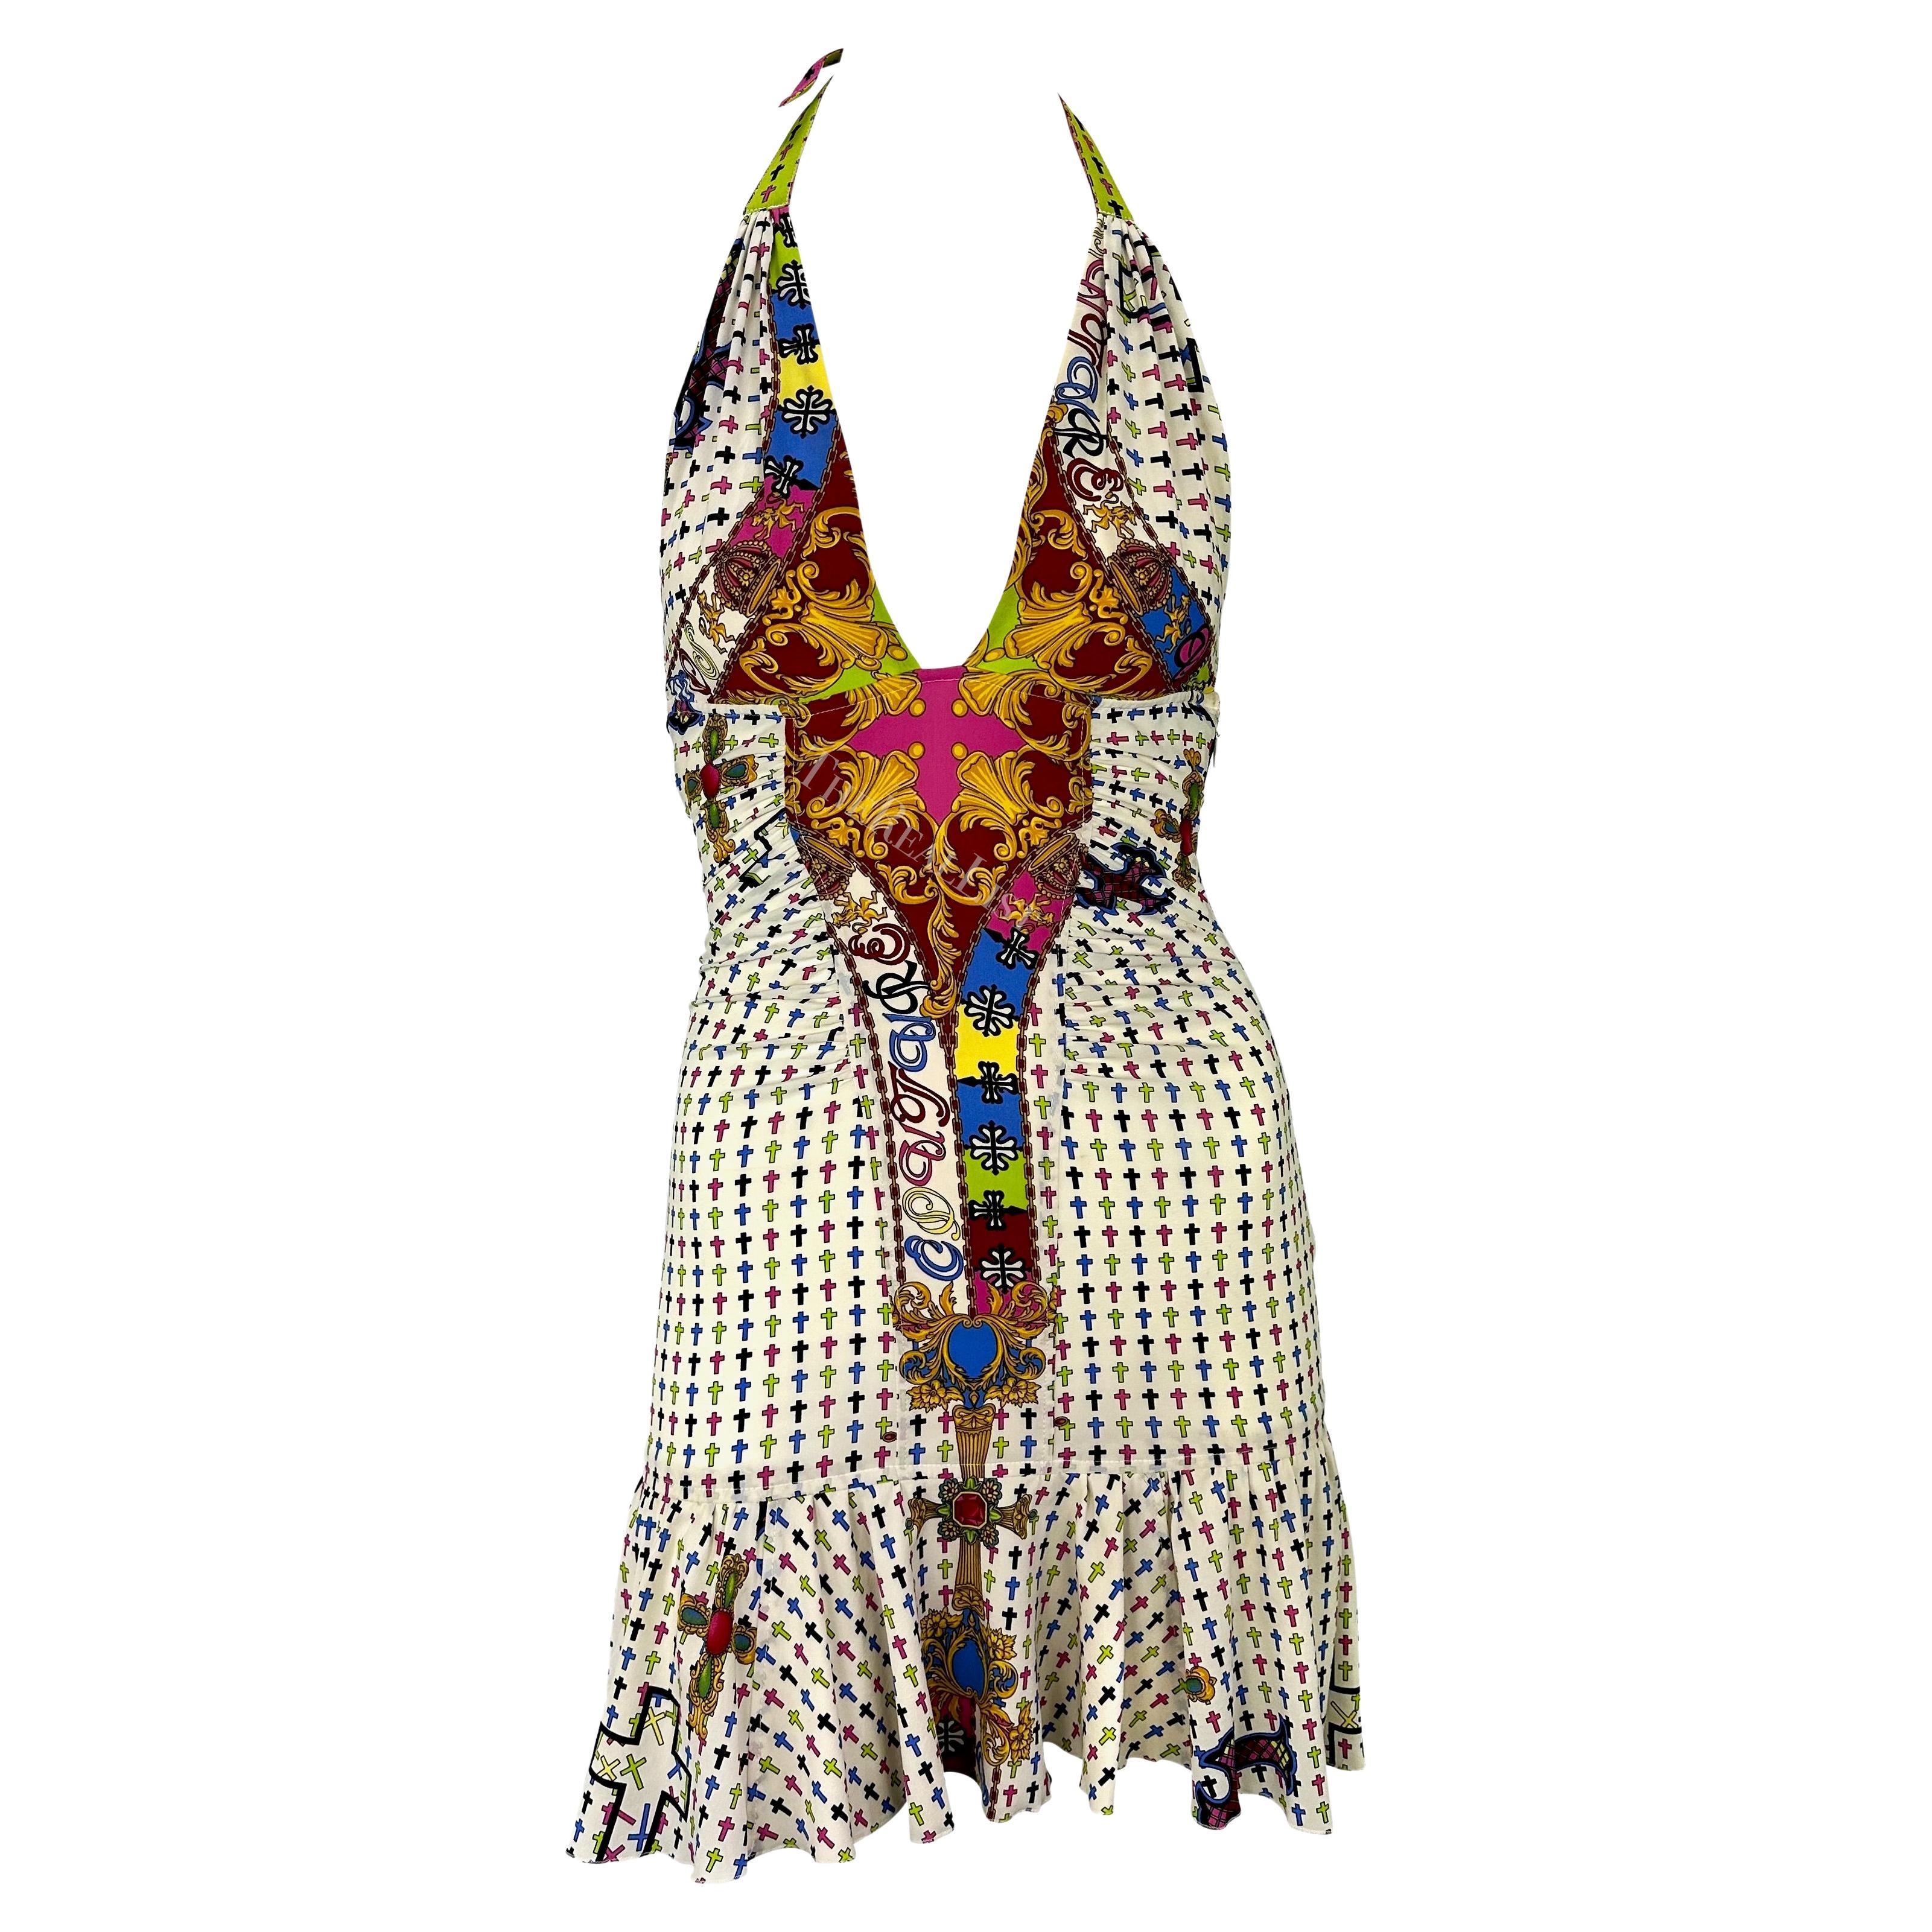 S/S 2005 Versace by Donatella Chaos Couture Multicolor Cross Print Halter Dress